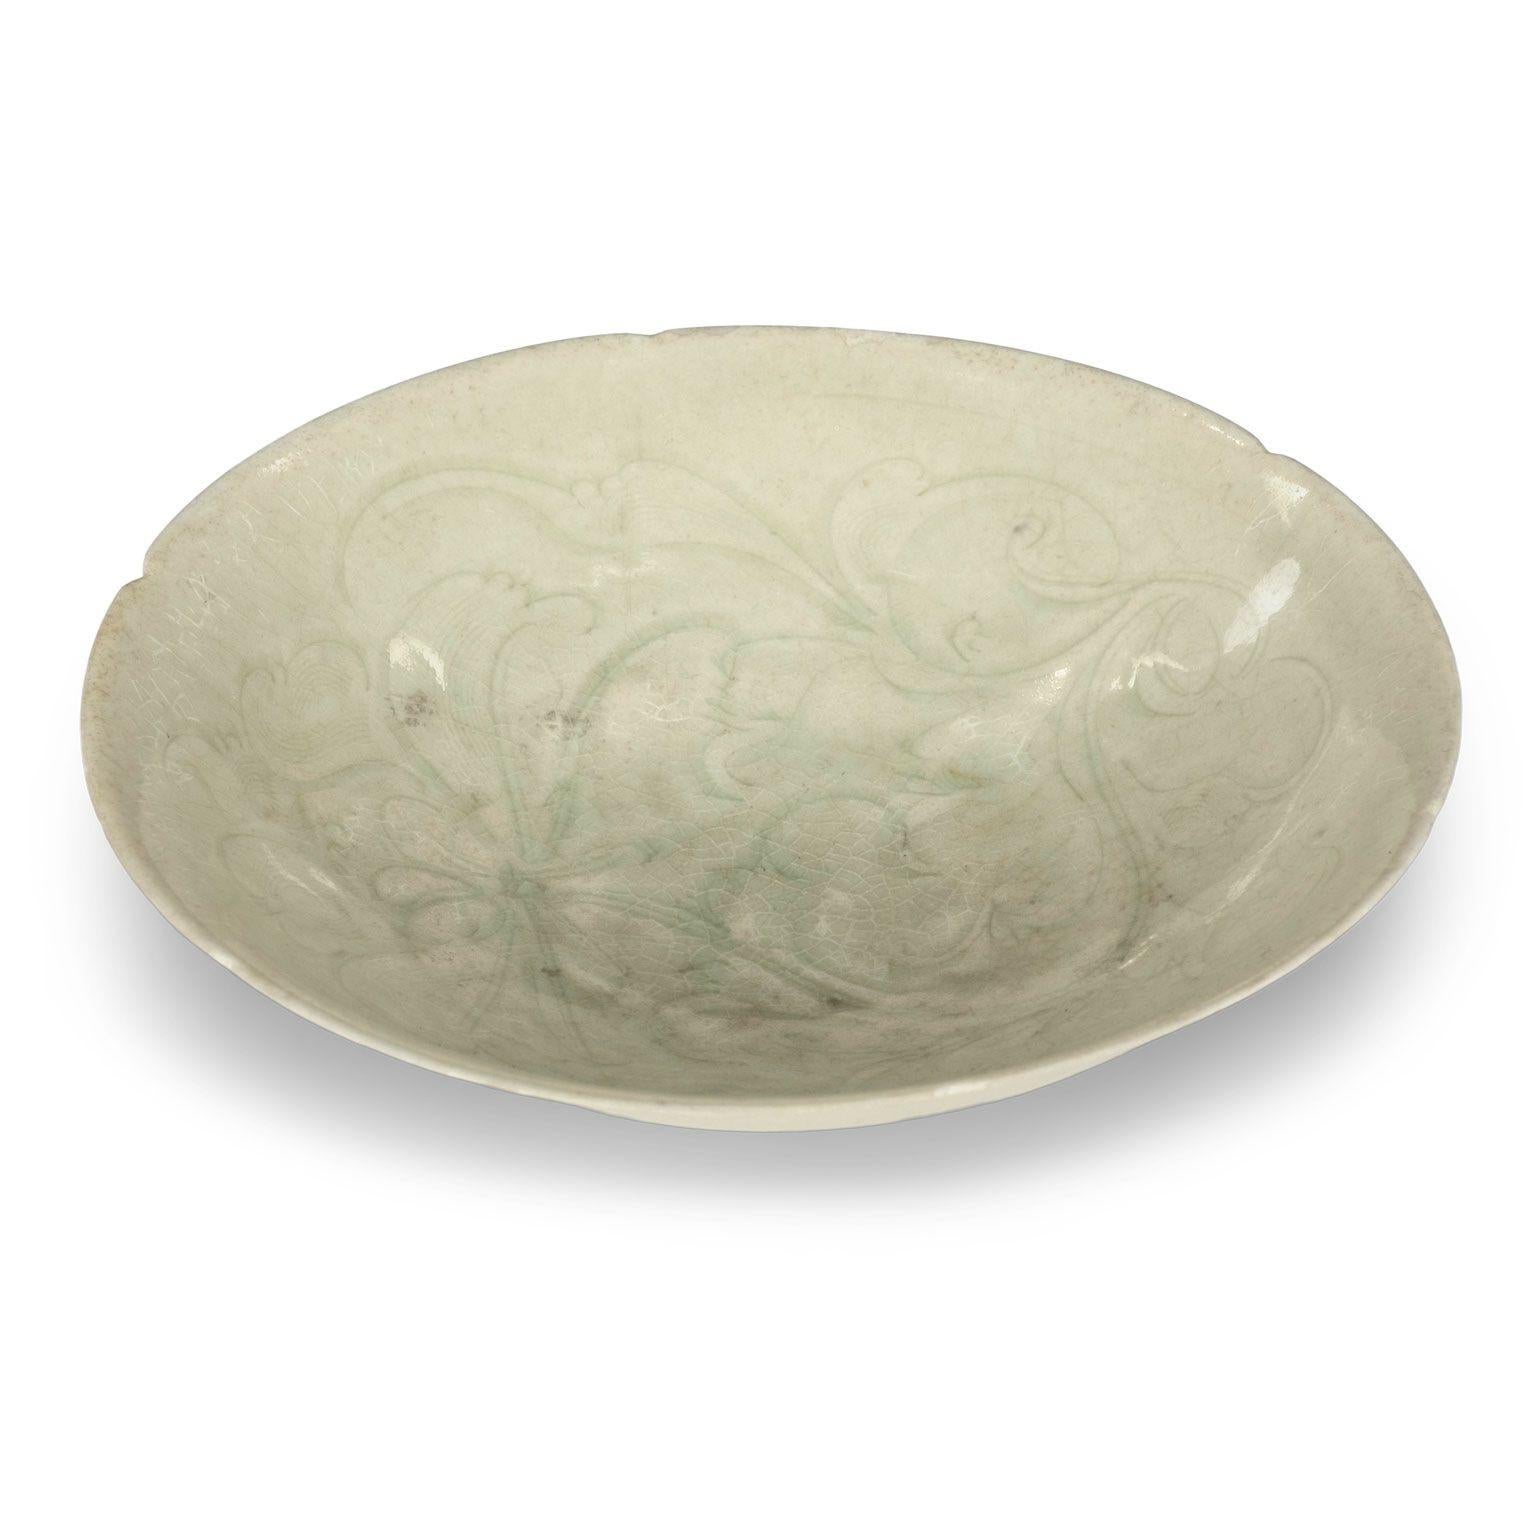 Chinese Qingbai lobed foliate-rim bowl, Song Dynasty, porcelain shallow bowl resting upon tapered footed base. Peony flower decoration incised upon interior of bowl. Known colloquially as celadon-jade, it is neither, but instead a type of Ding-ware